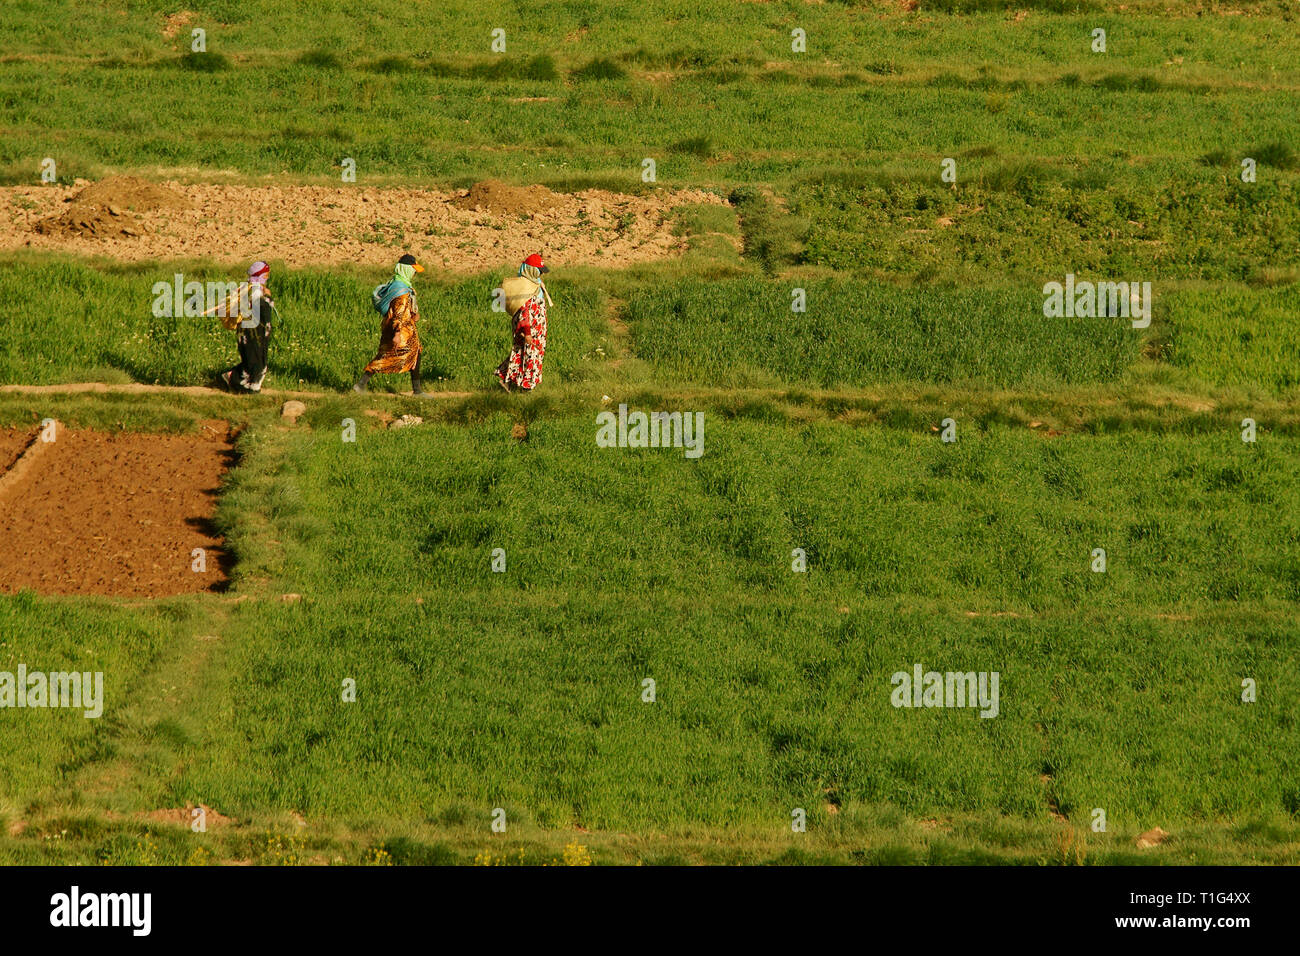 African women in colorful outfits are going across the field. Atlas Mountains. Morocco Stock Photo